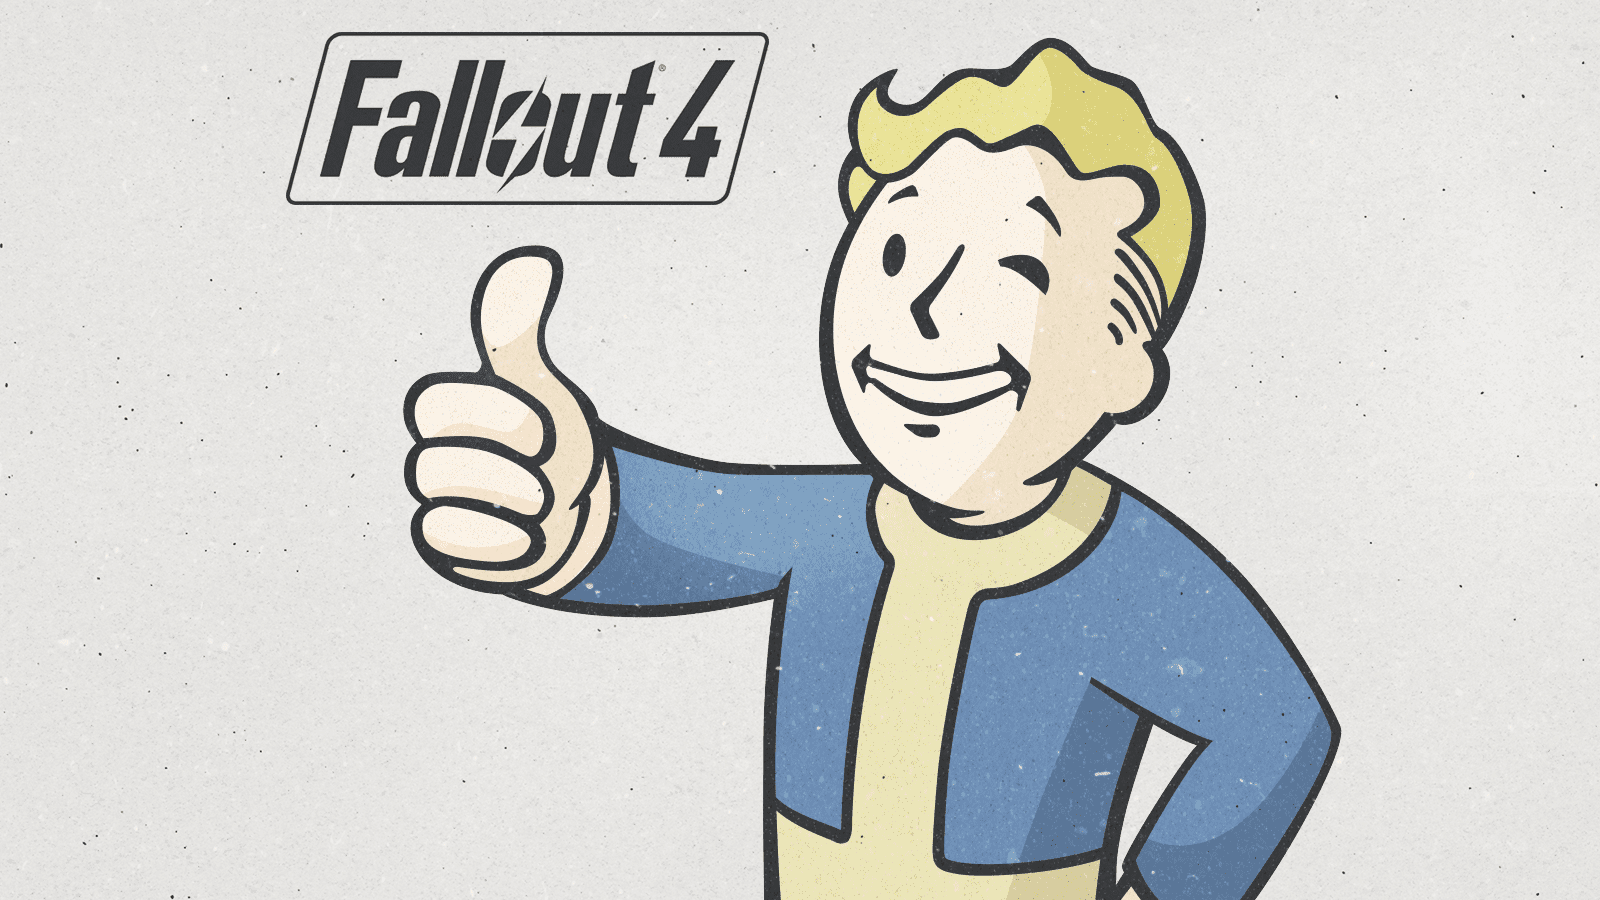 Fallout 4 GOTY Out Today, Just a Standard Disc With Download Code